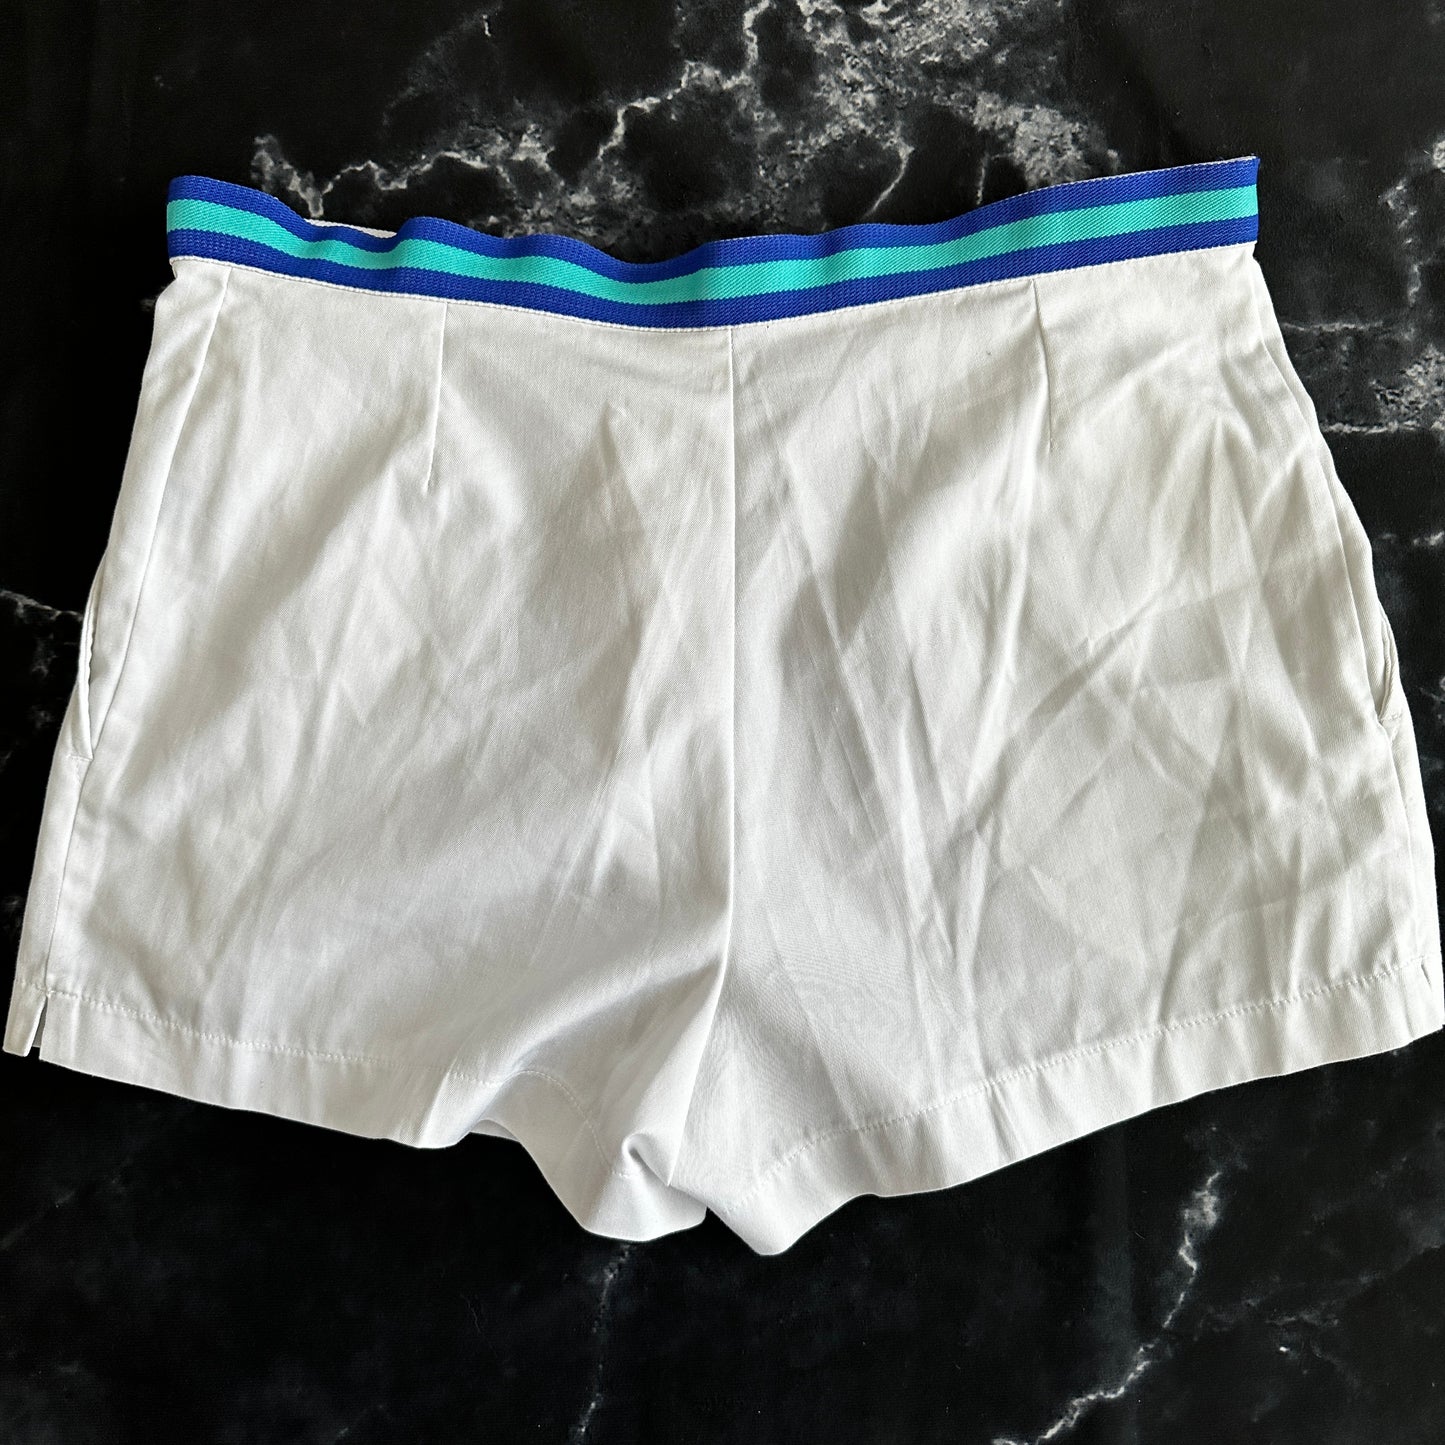 Fila Vintage 80s Tennis Shorts - 48 /M - Made in Italy